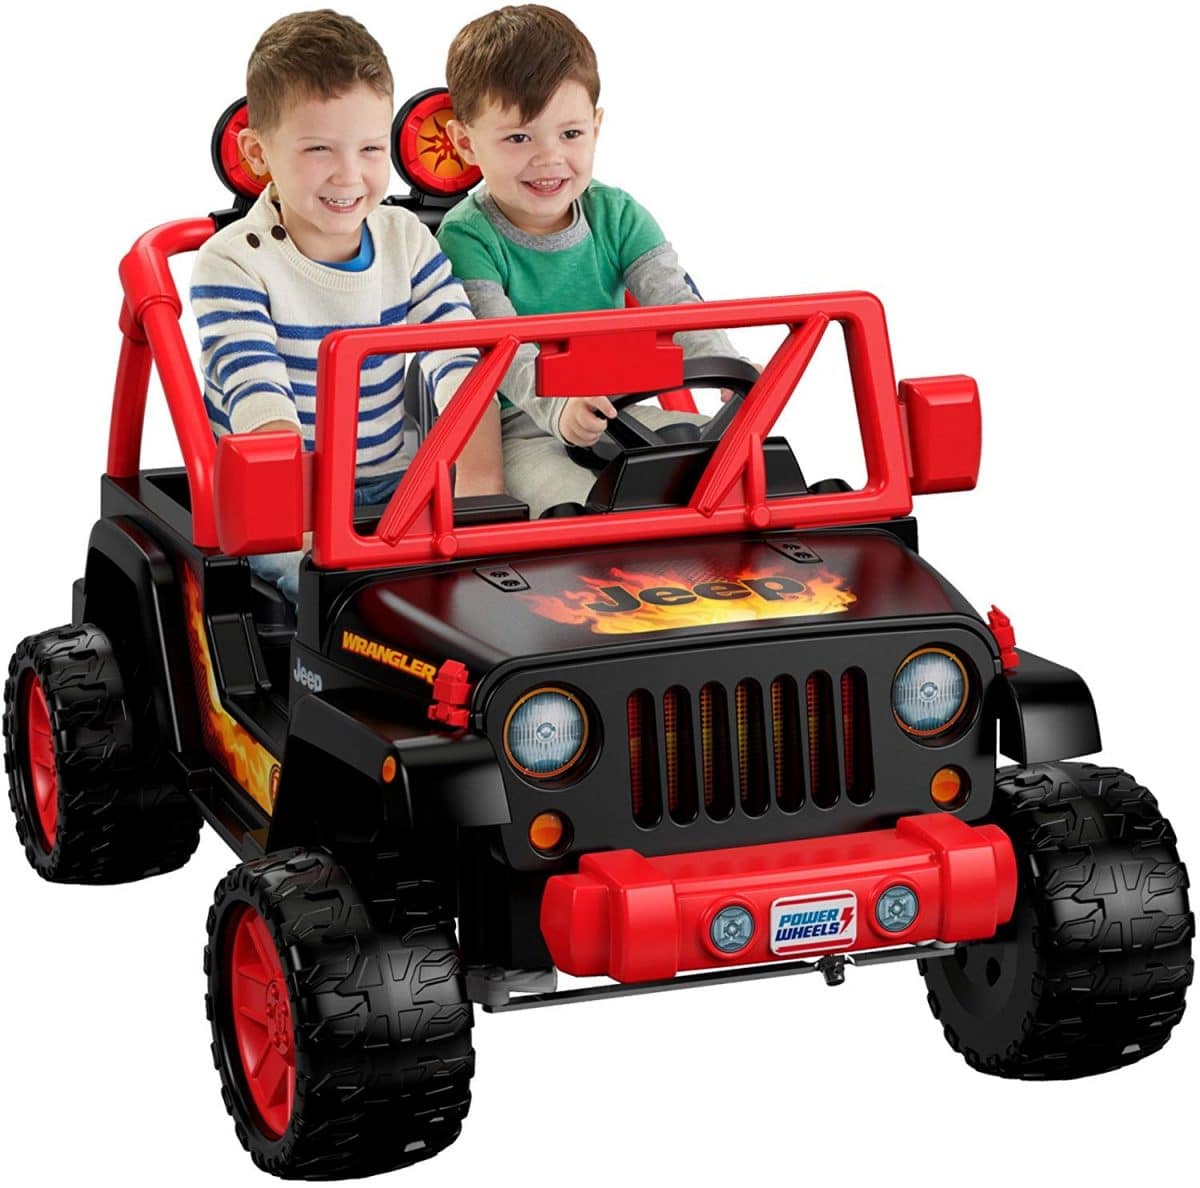 motorized vehicle for 5 year old